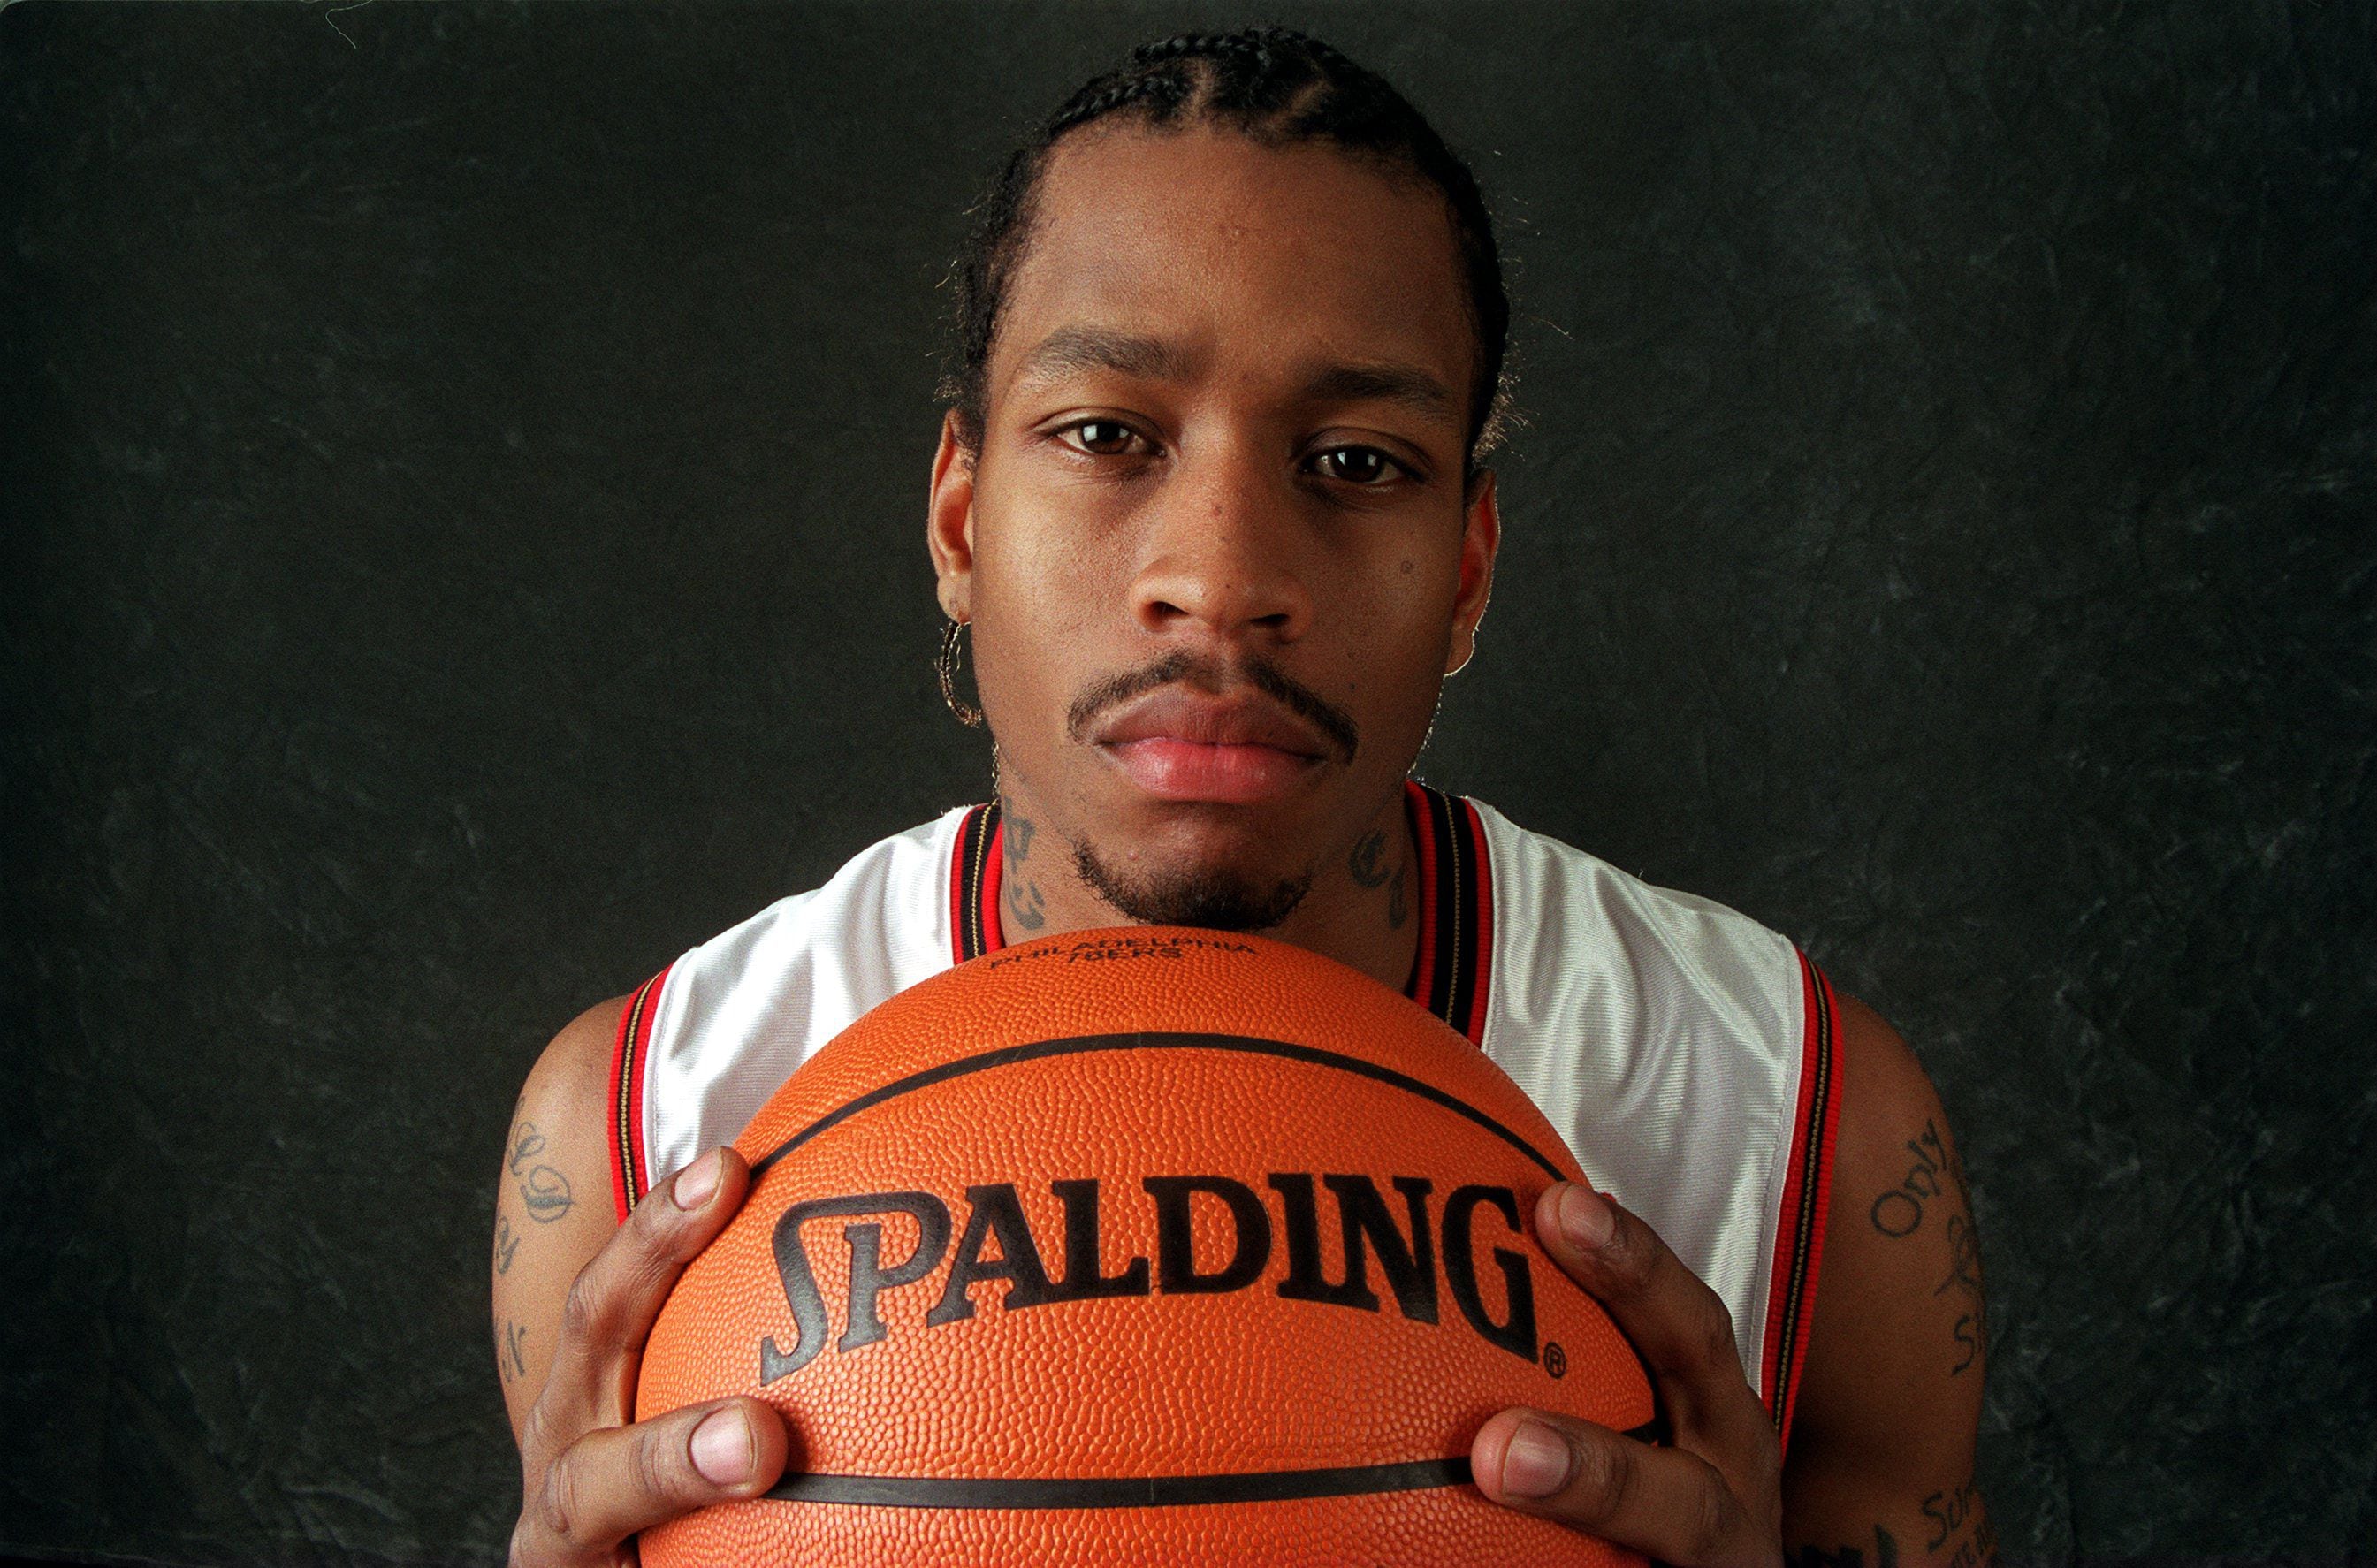 Allen Iverson wants to play ball, just not in D-League